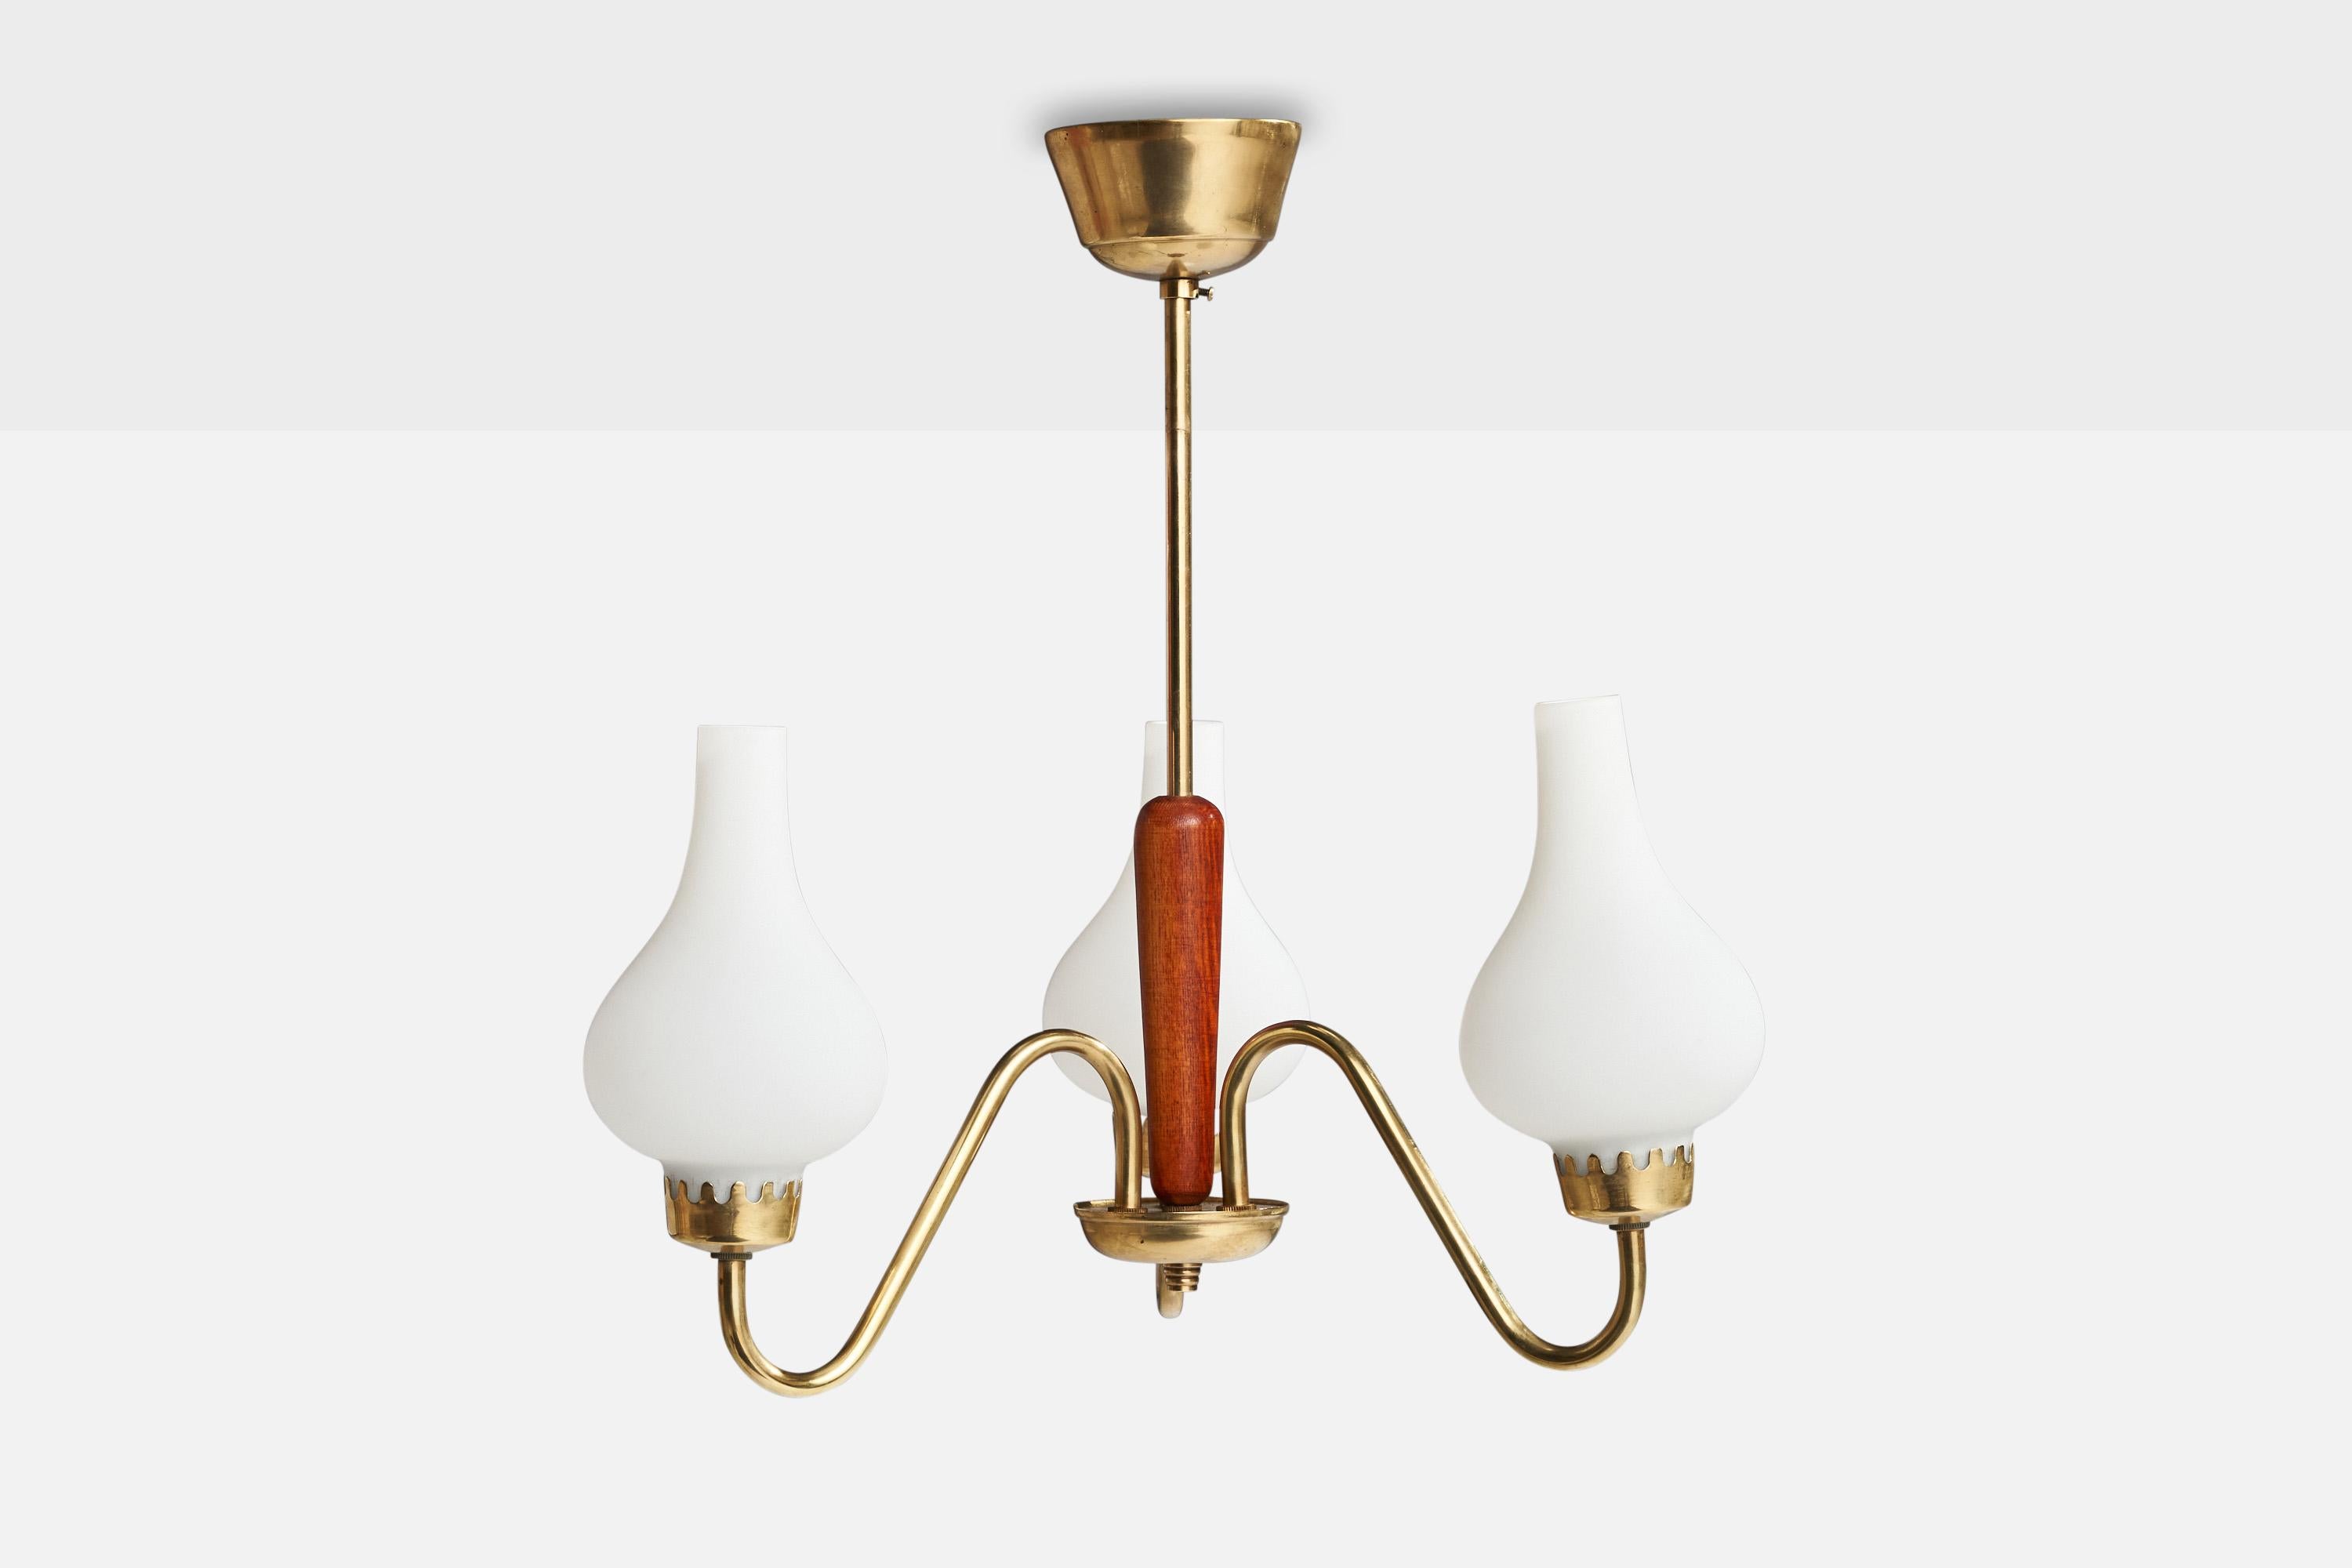 A brass, teak and opaline glass chandelier designed and produced in Sweden, 1950s.

Dimensions of canopy (inches): 2” H x 3.5” Diameter
Socket takes standard E-14 bulbs. 3 sockets.There is no maximum wattage stated on the fixture. All lighting will